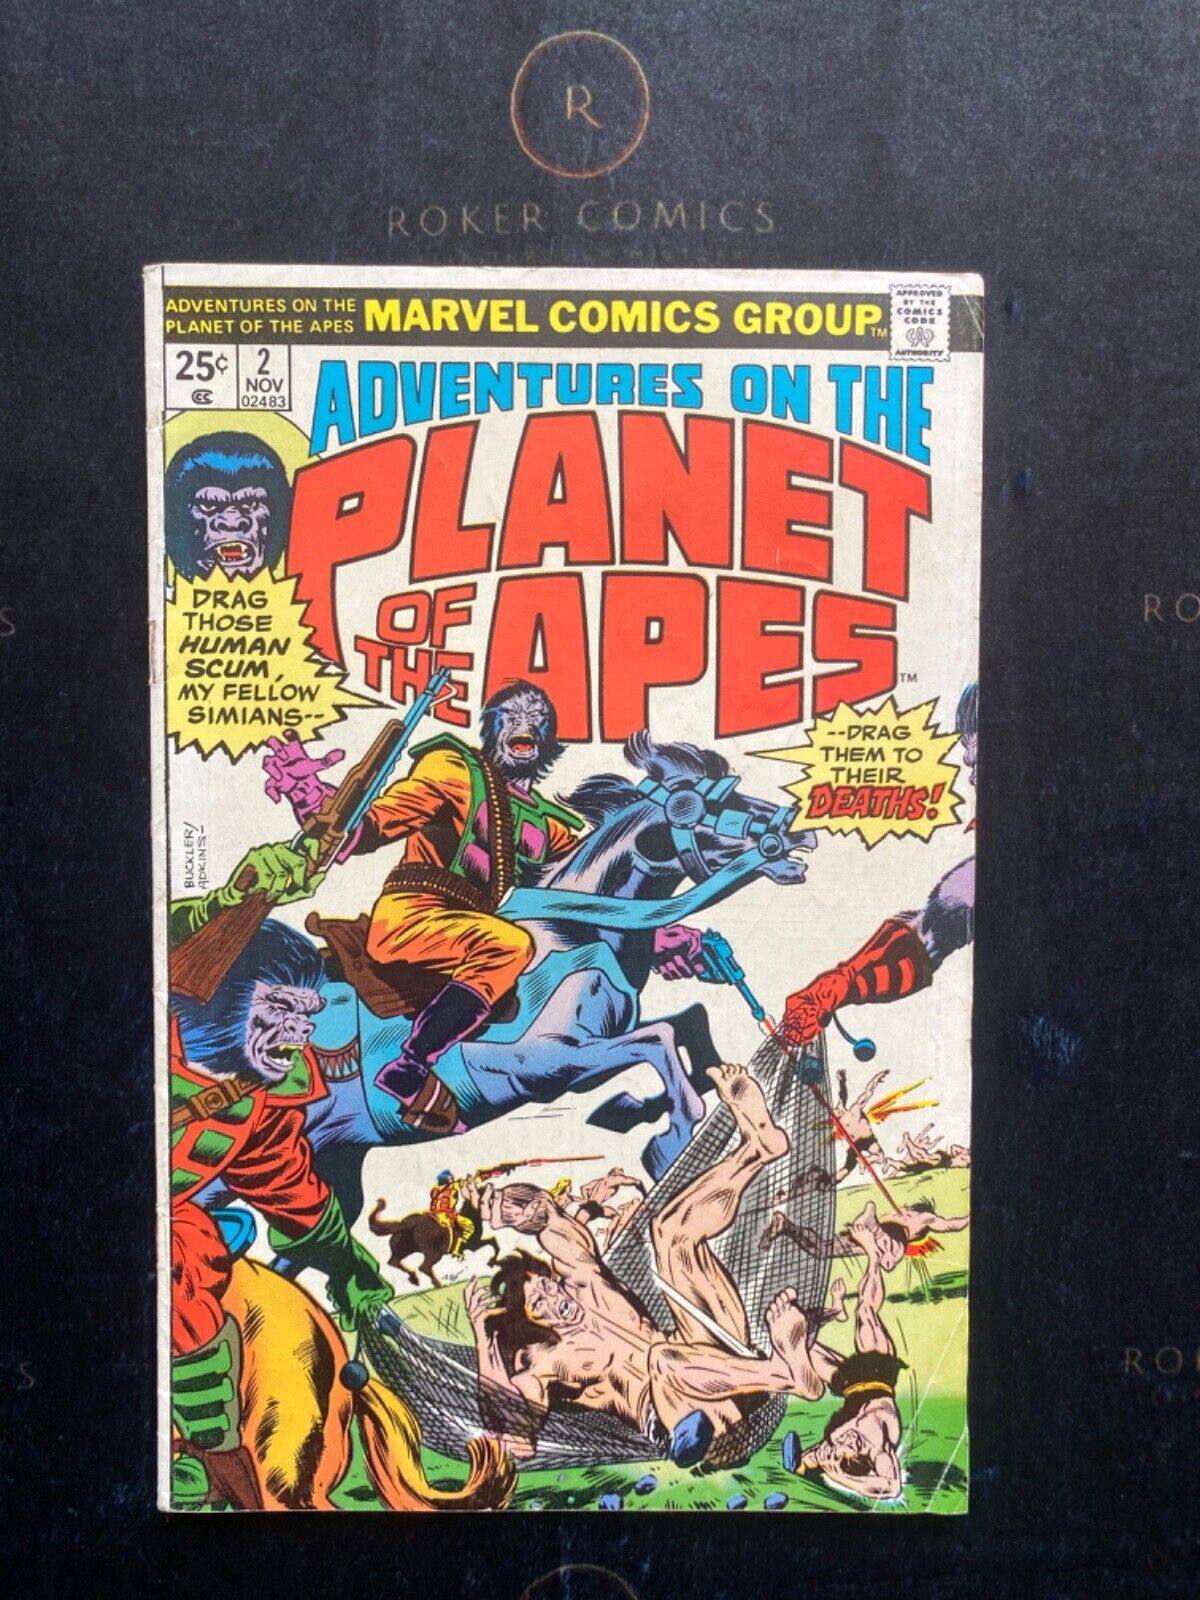 Rare 1975 Adventure On The Planet Of The Apes #2